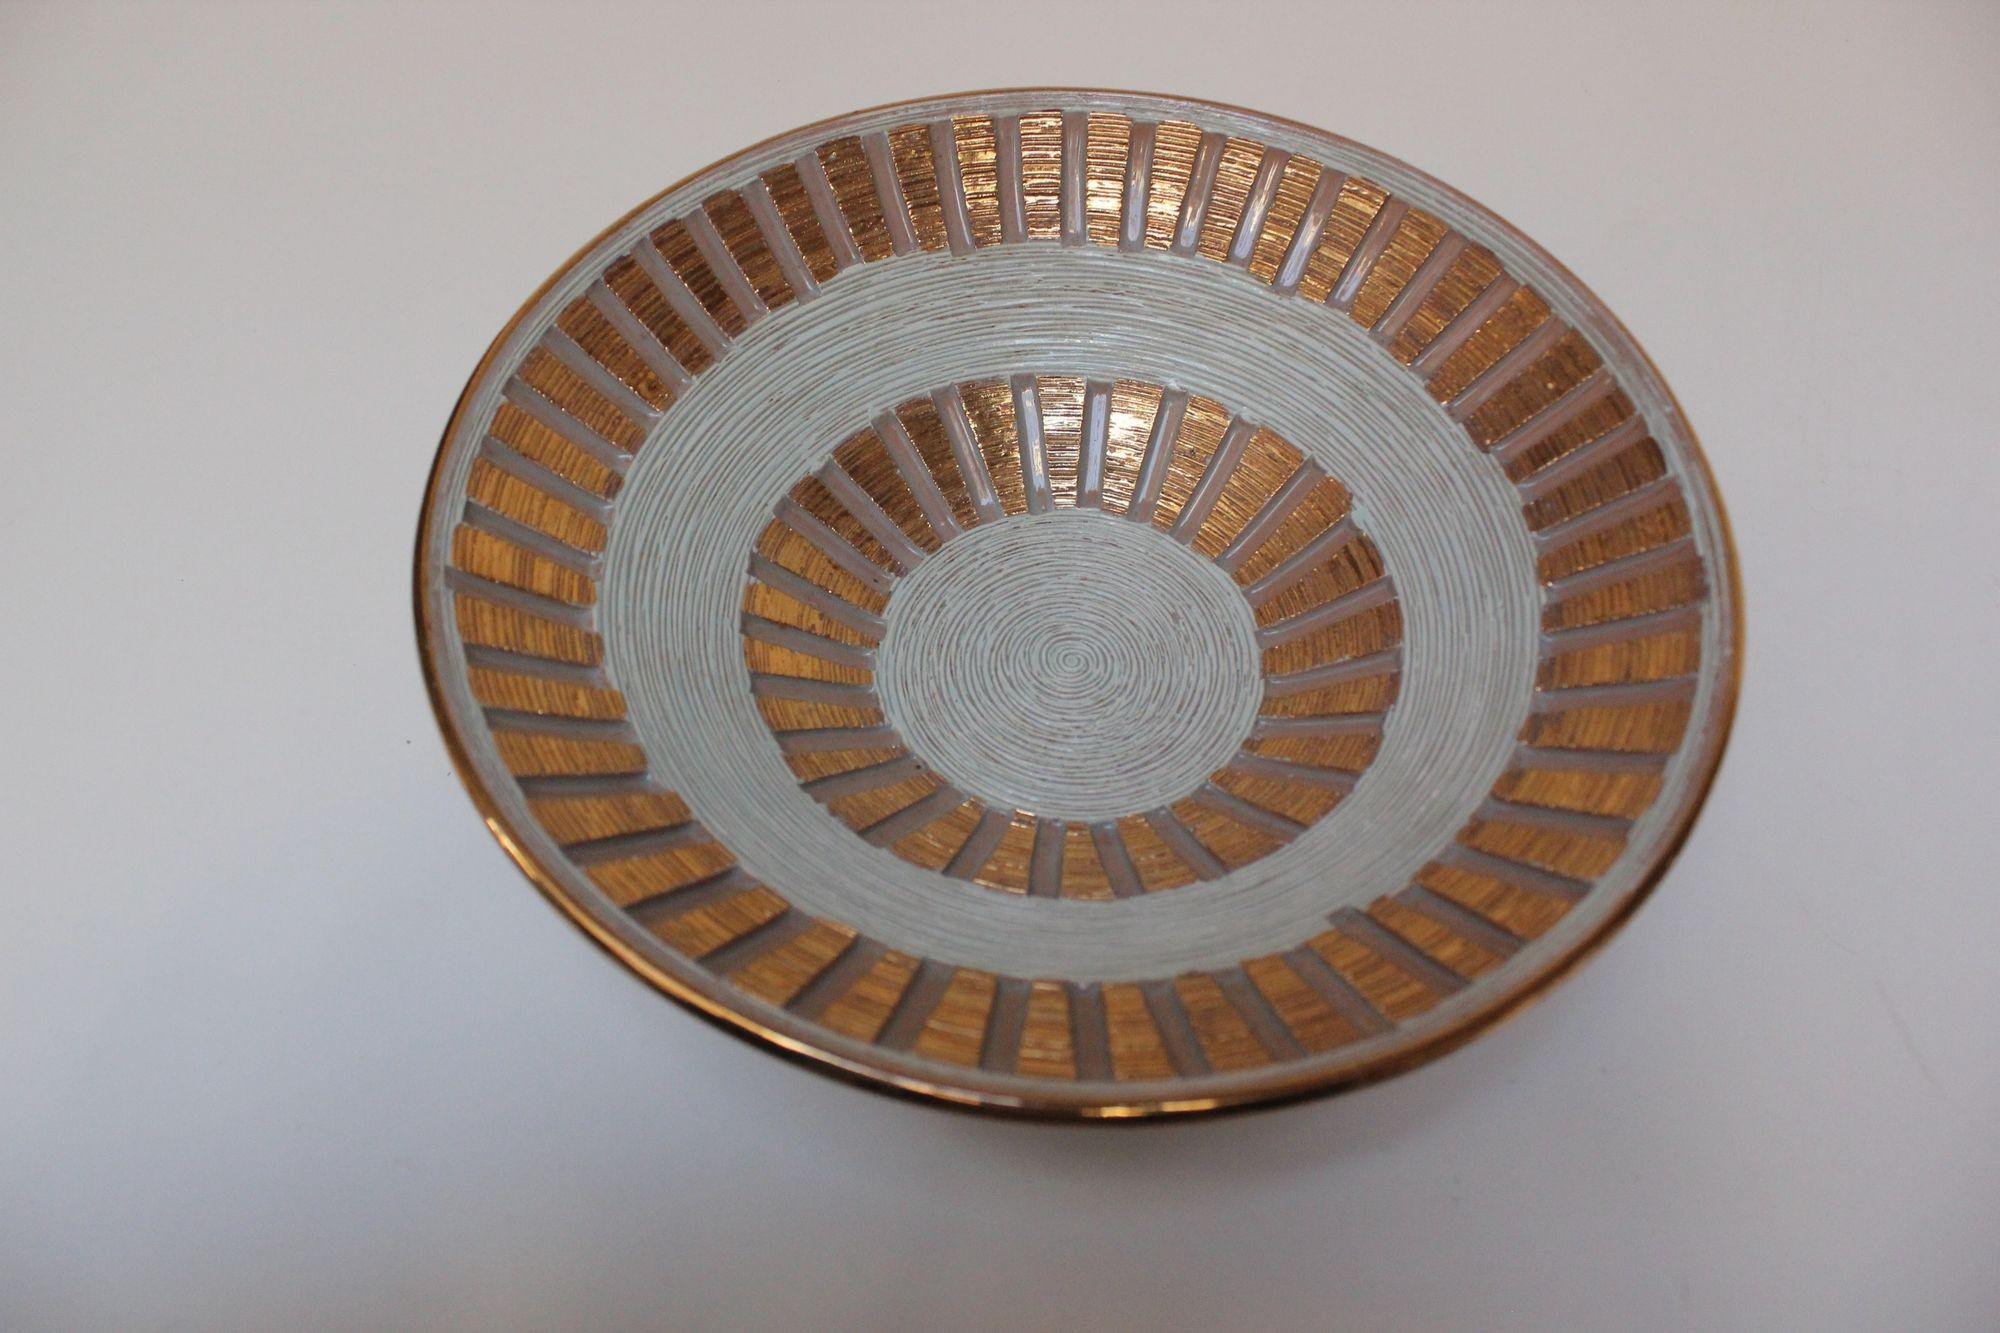 Glamorous vintage ceramic bowl/charger with incised design and hand-painted gold accents designed by Fratelli Fanciullacci for Elbee (ca. 1950s, ltaly).
The etched sgraffito linear pattern reveals the taupe base under the matte off white/ almost